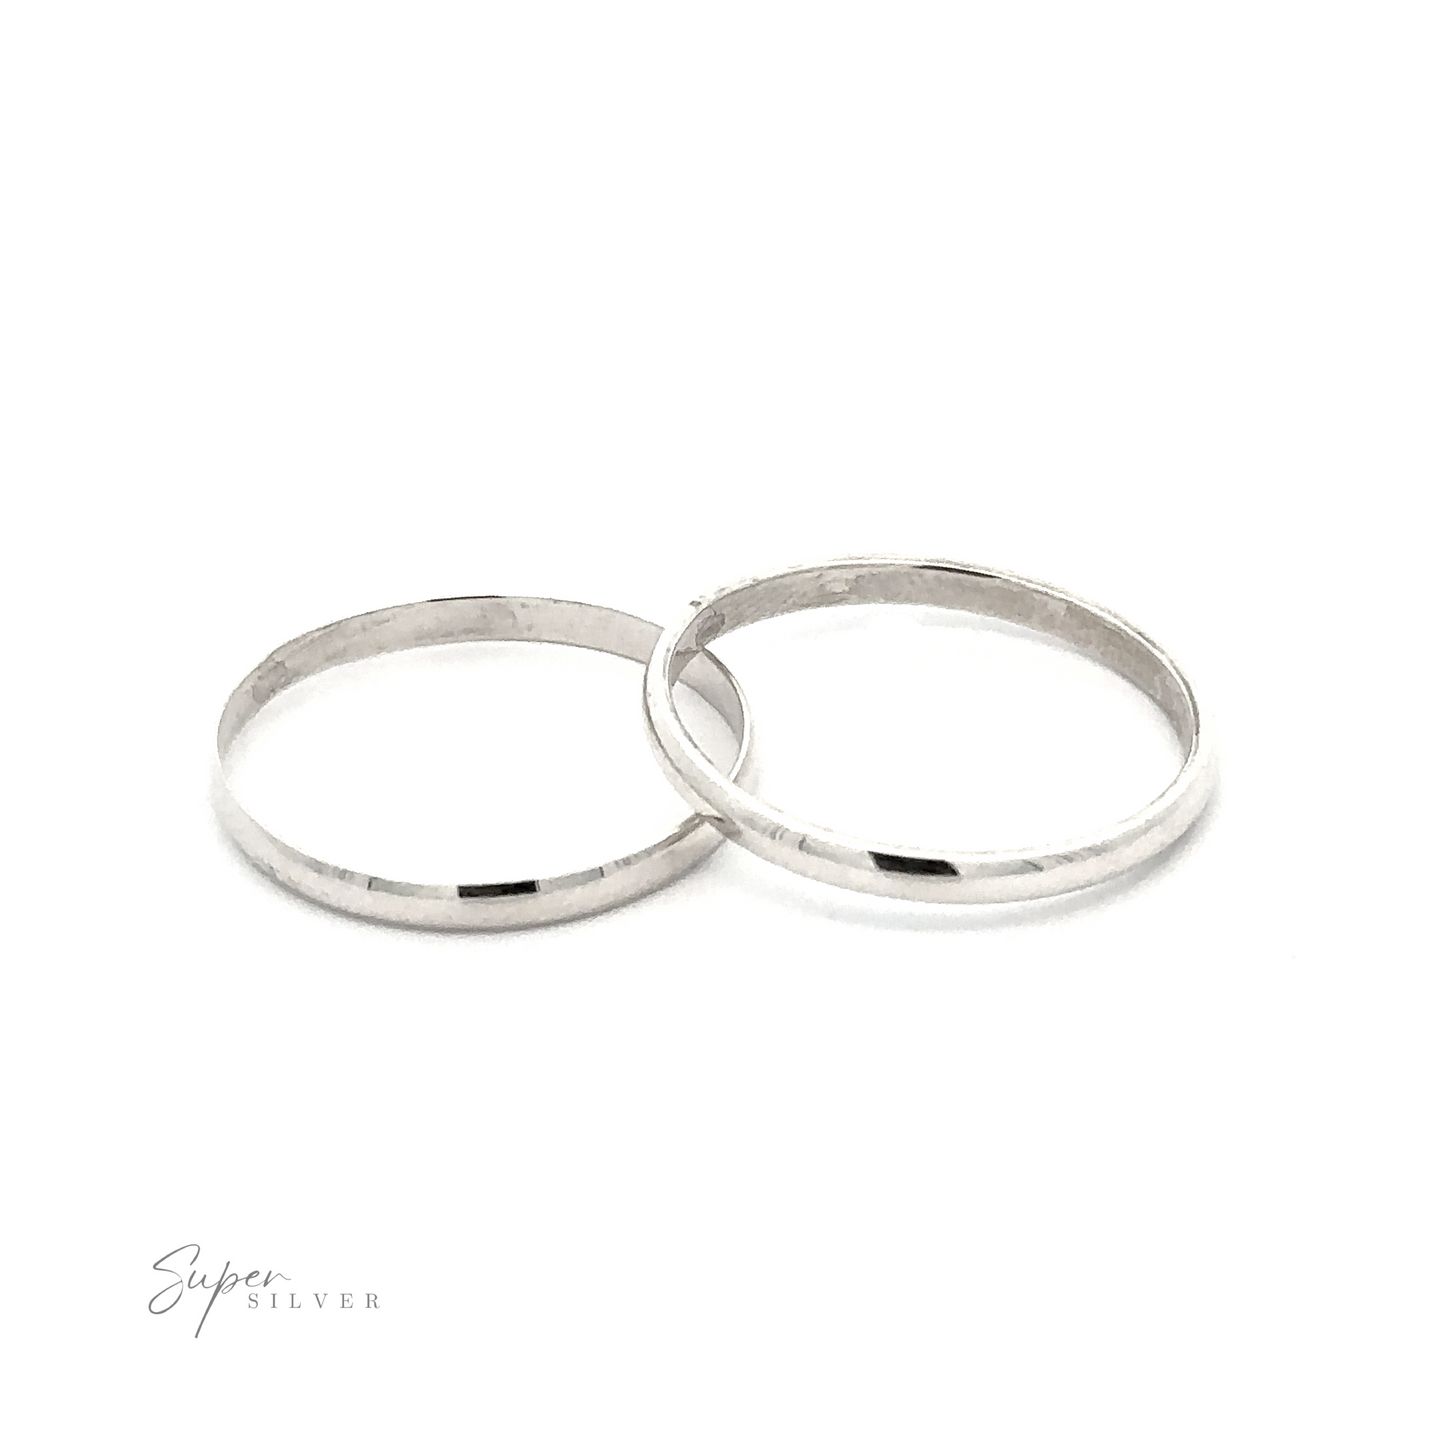 Delicate .925 sterling silver rings with a 2mm Plain Band on a white background.